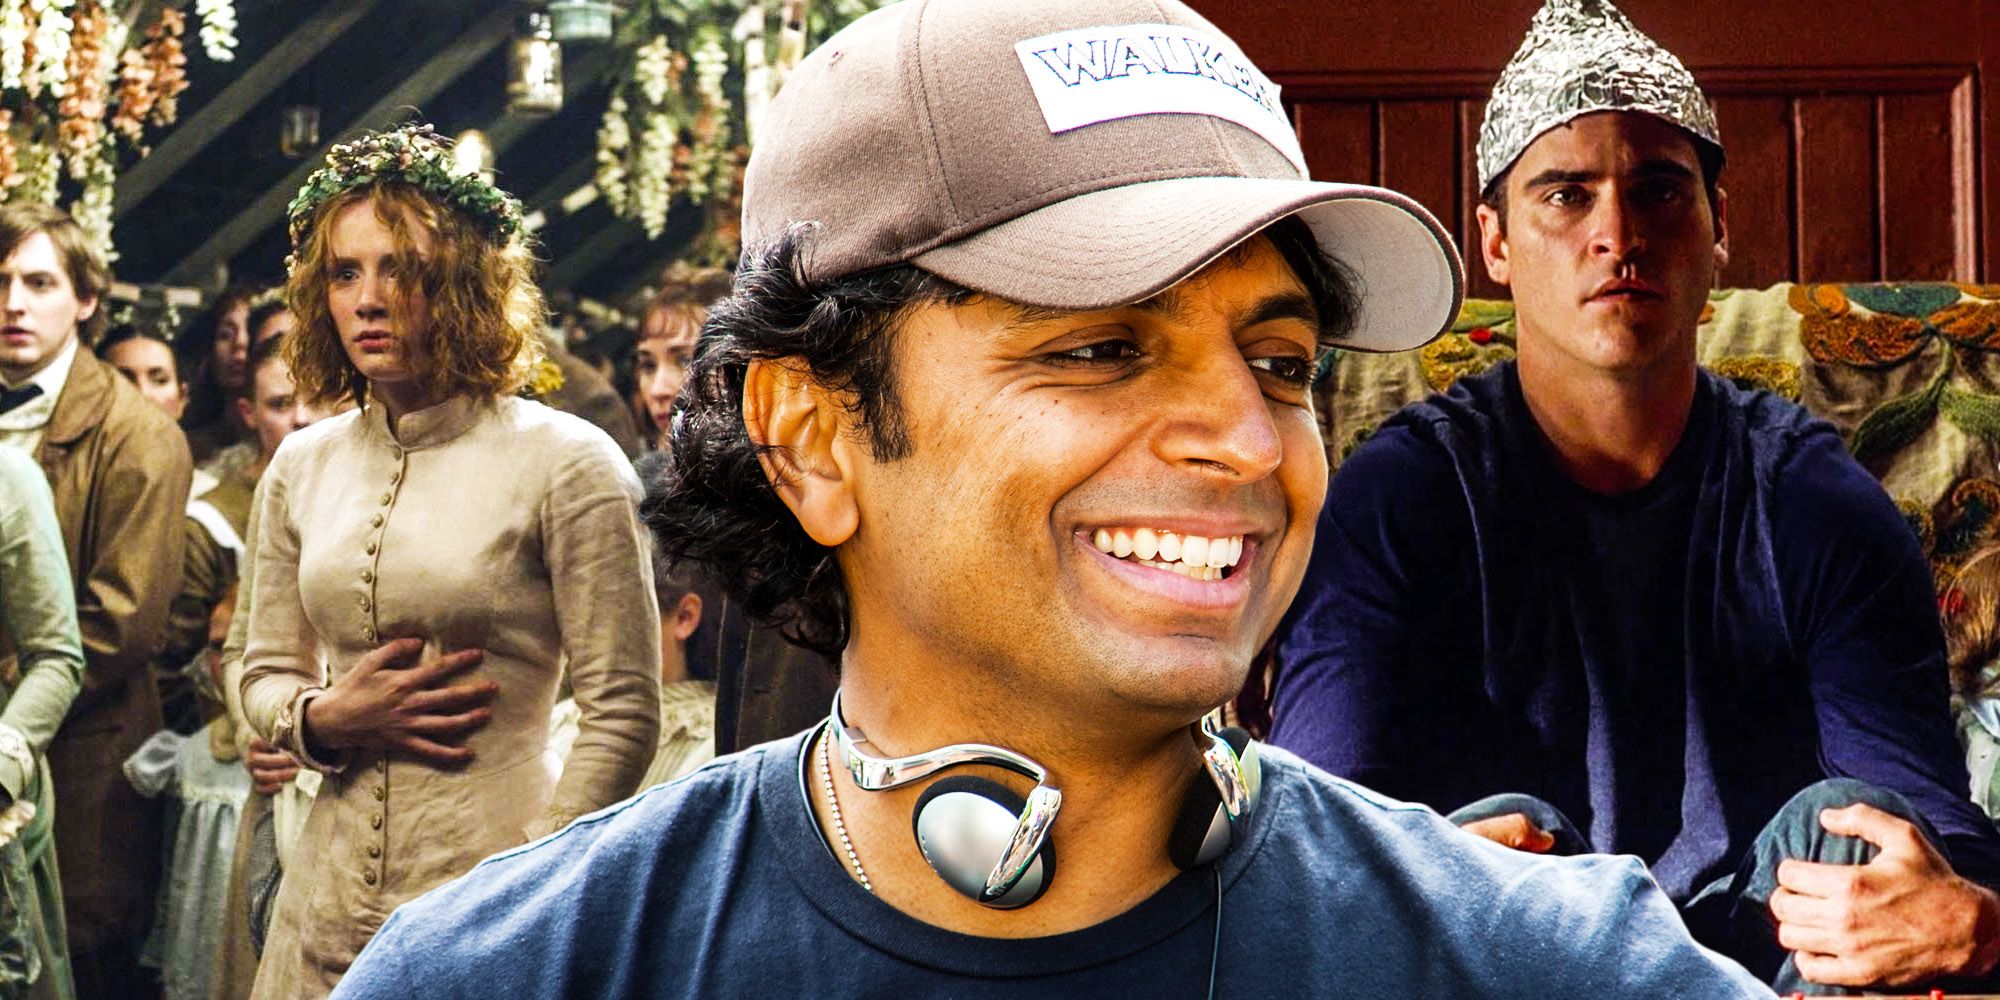 M Night Shyamalan Silly and Twisty Movies The village Signs